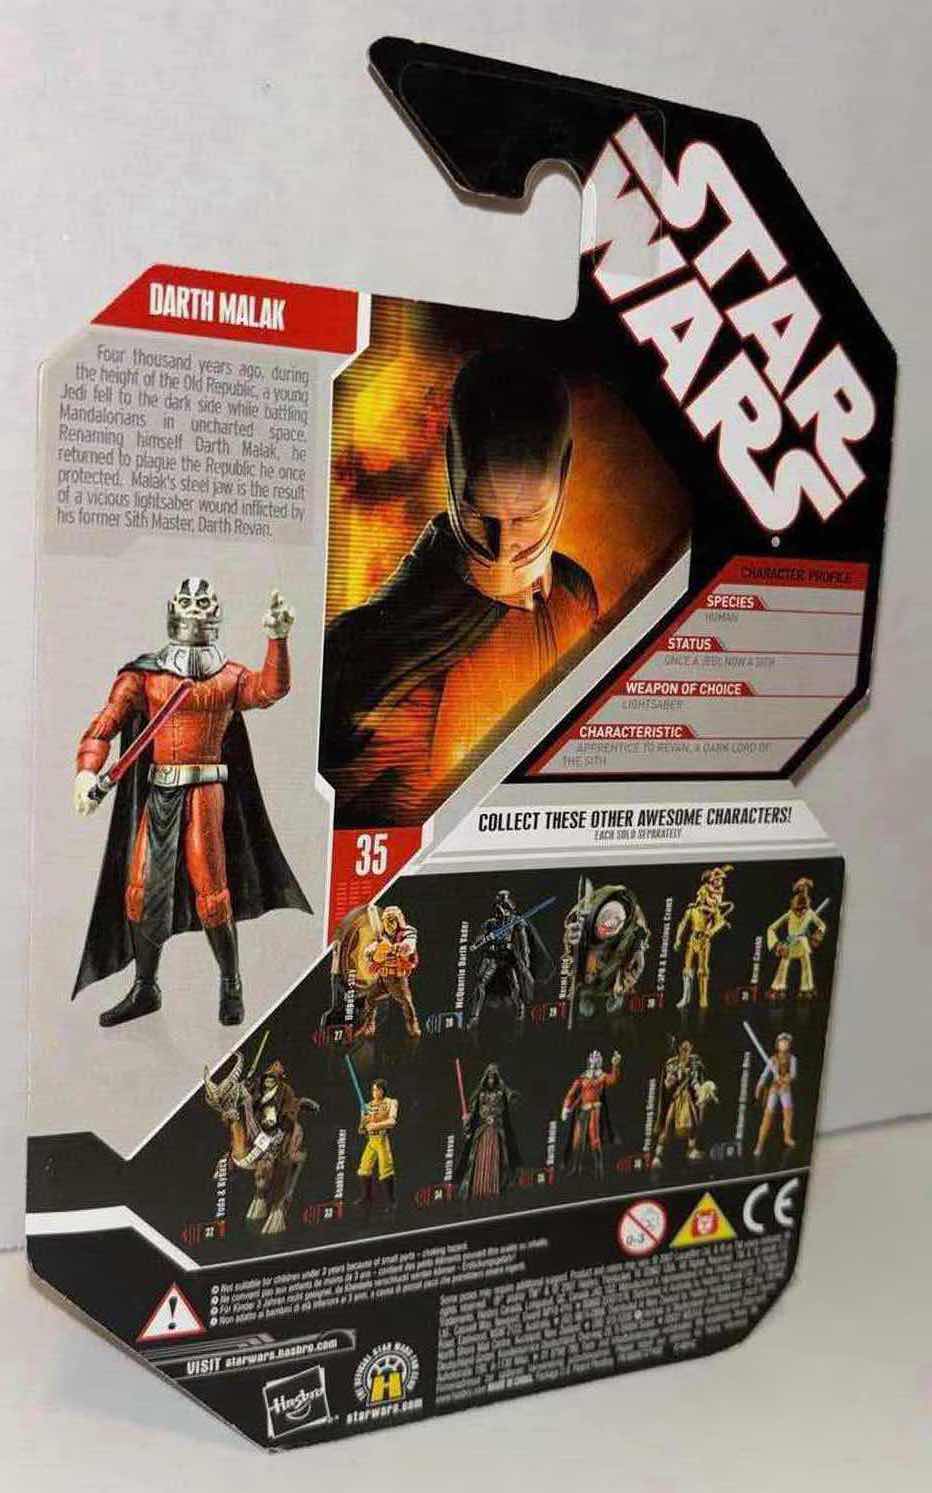 Photo 2 of NEW 2007 HASBRO STAR WARS 30TH ANNIVERSARY EXPANDED UNIVERSE FIGURE & ACCESSORIES “DARTH MALAK” W EXCLUSIVE COLLECTOR COIN